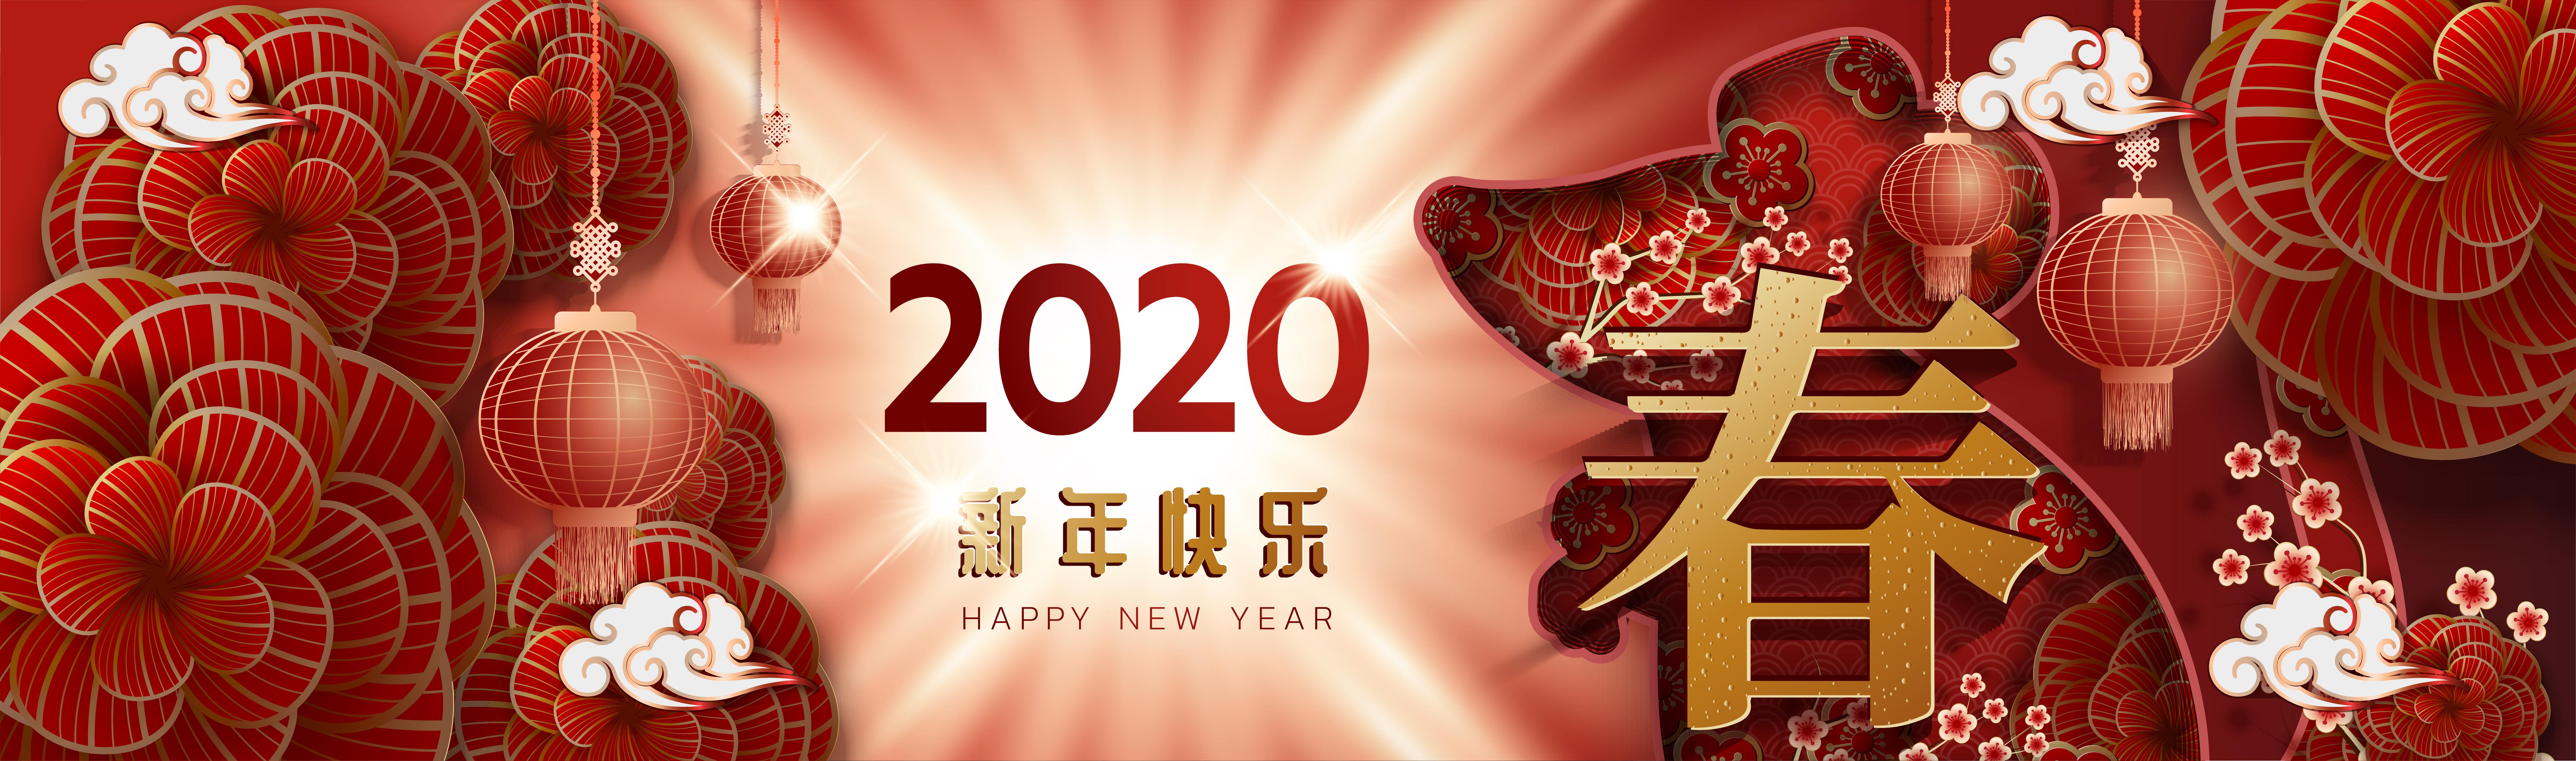 Happy New Year 2020 Image Archives New Year 2020 HD